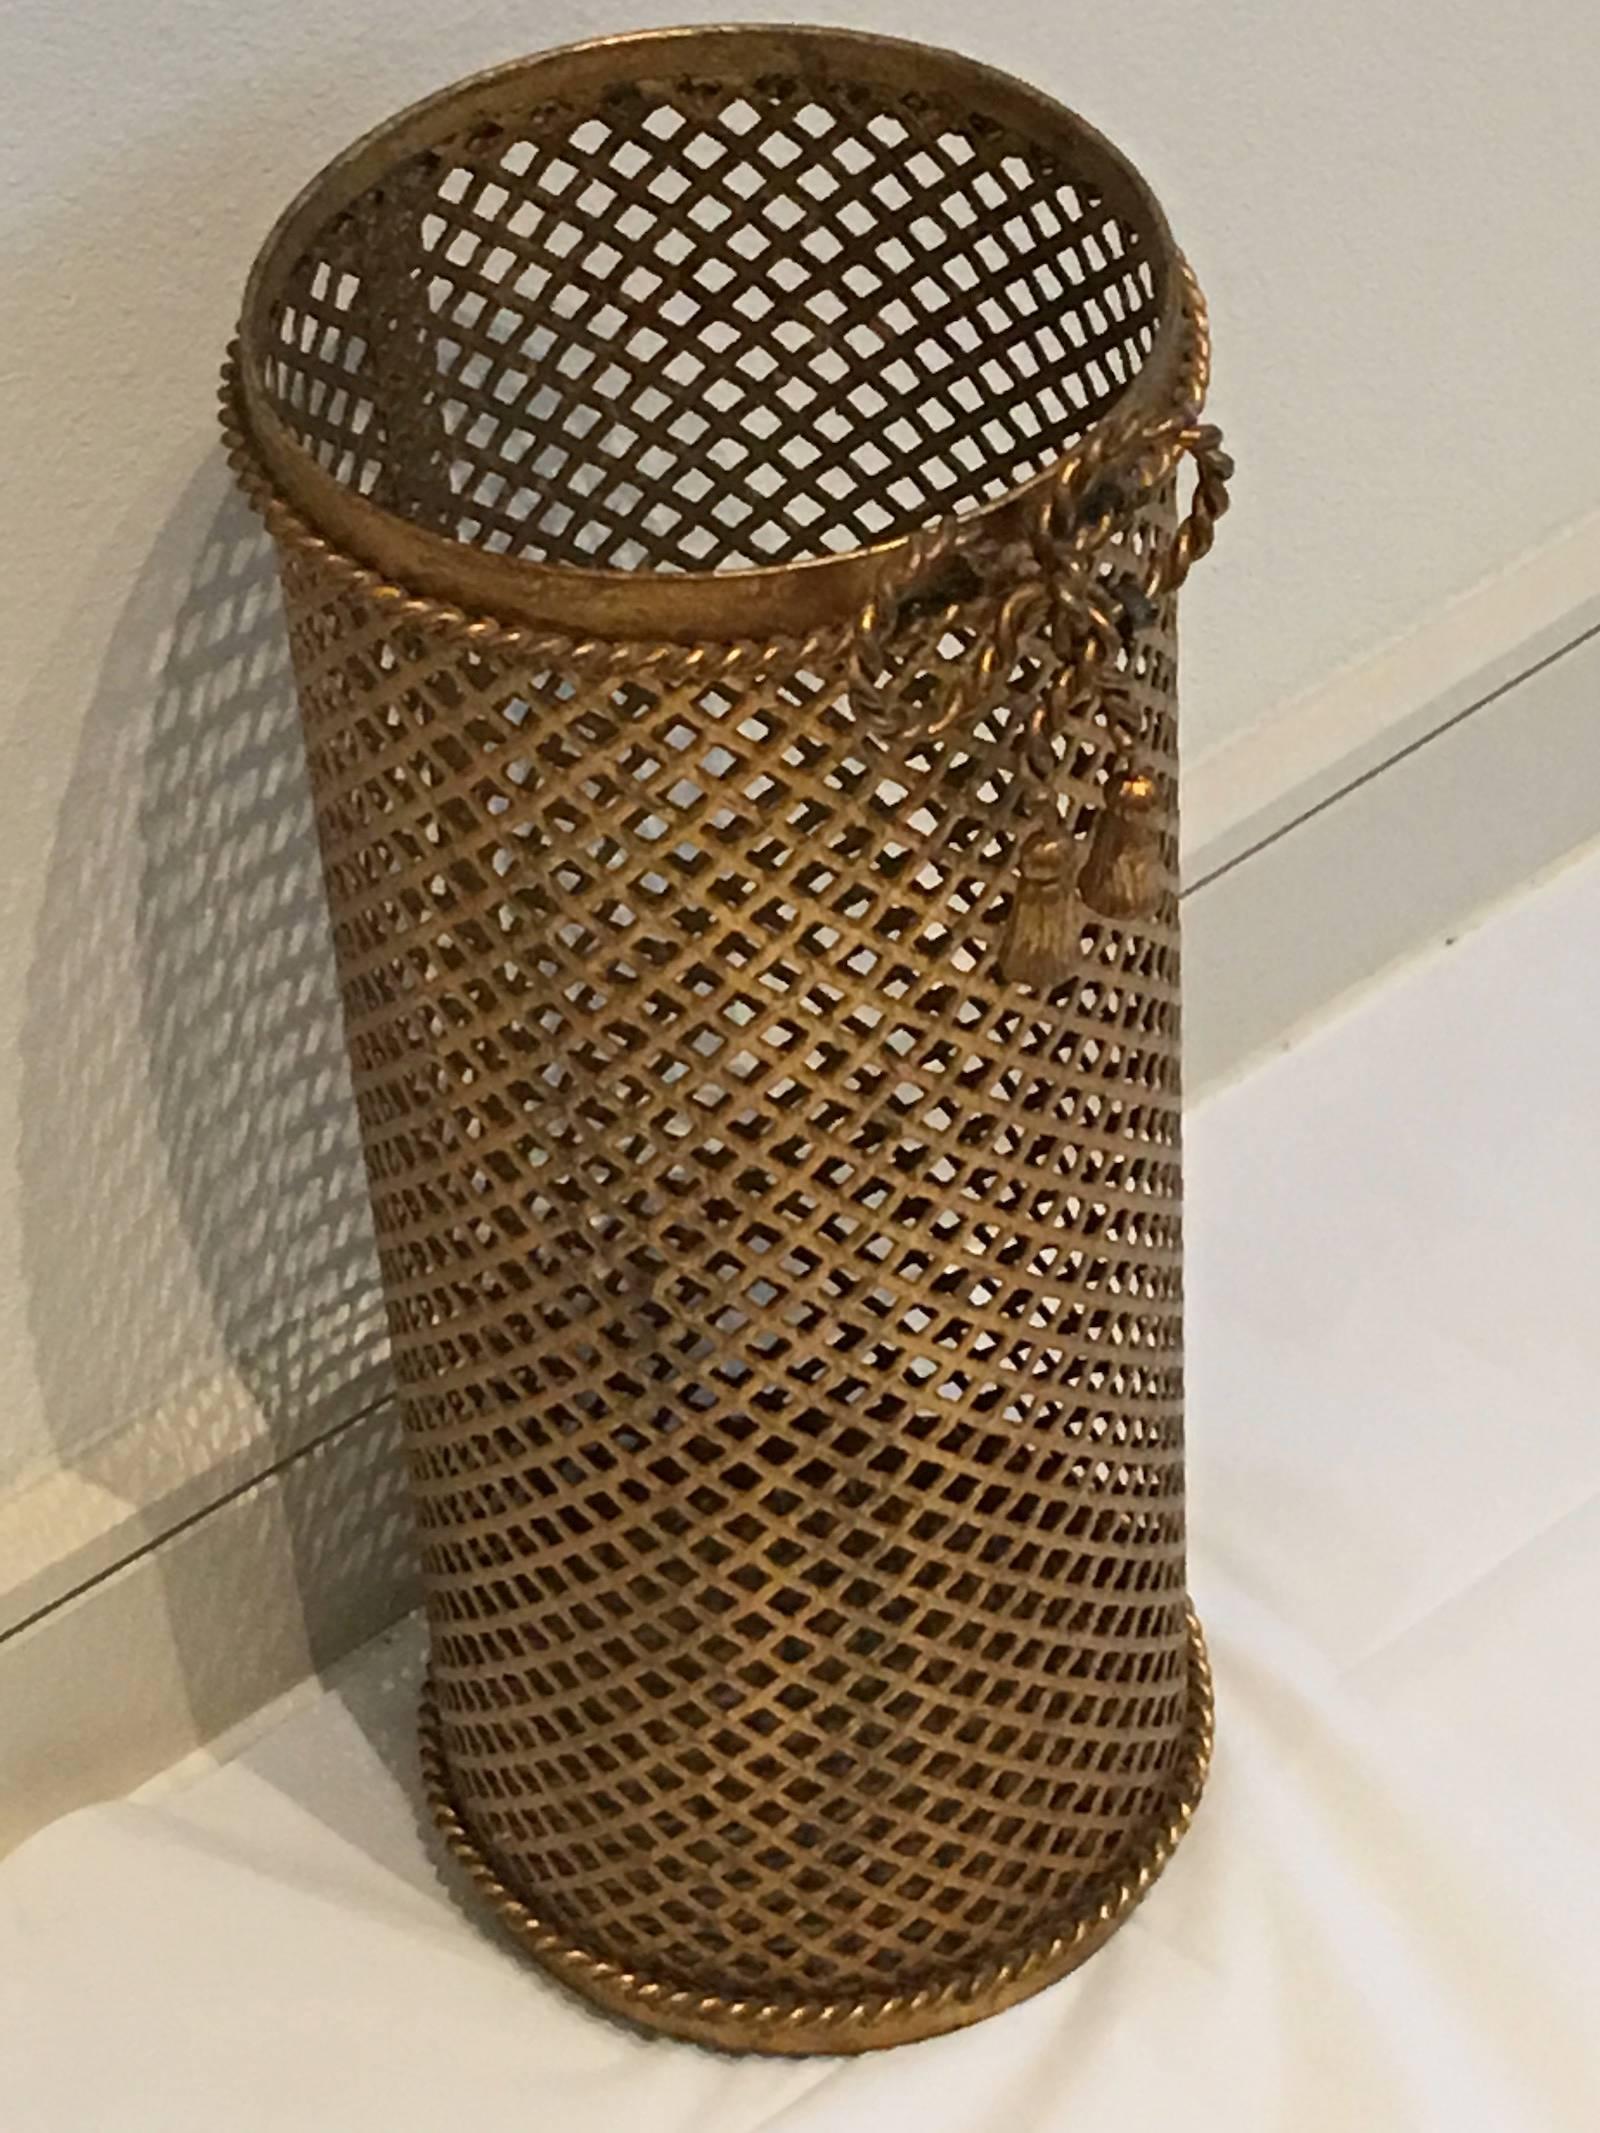 A gilded Hollywood Regency style umbrella stand made in Florence, Italy, circa 1950 by Li Puma Firenze. The perforated lattice patterned metalwork with bent rope and tassel details finish the piece perfectly.